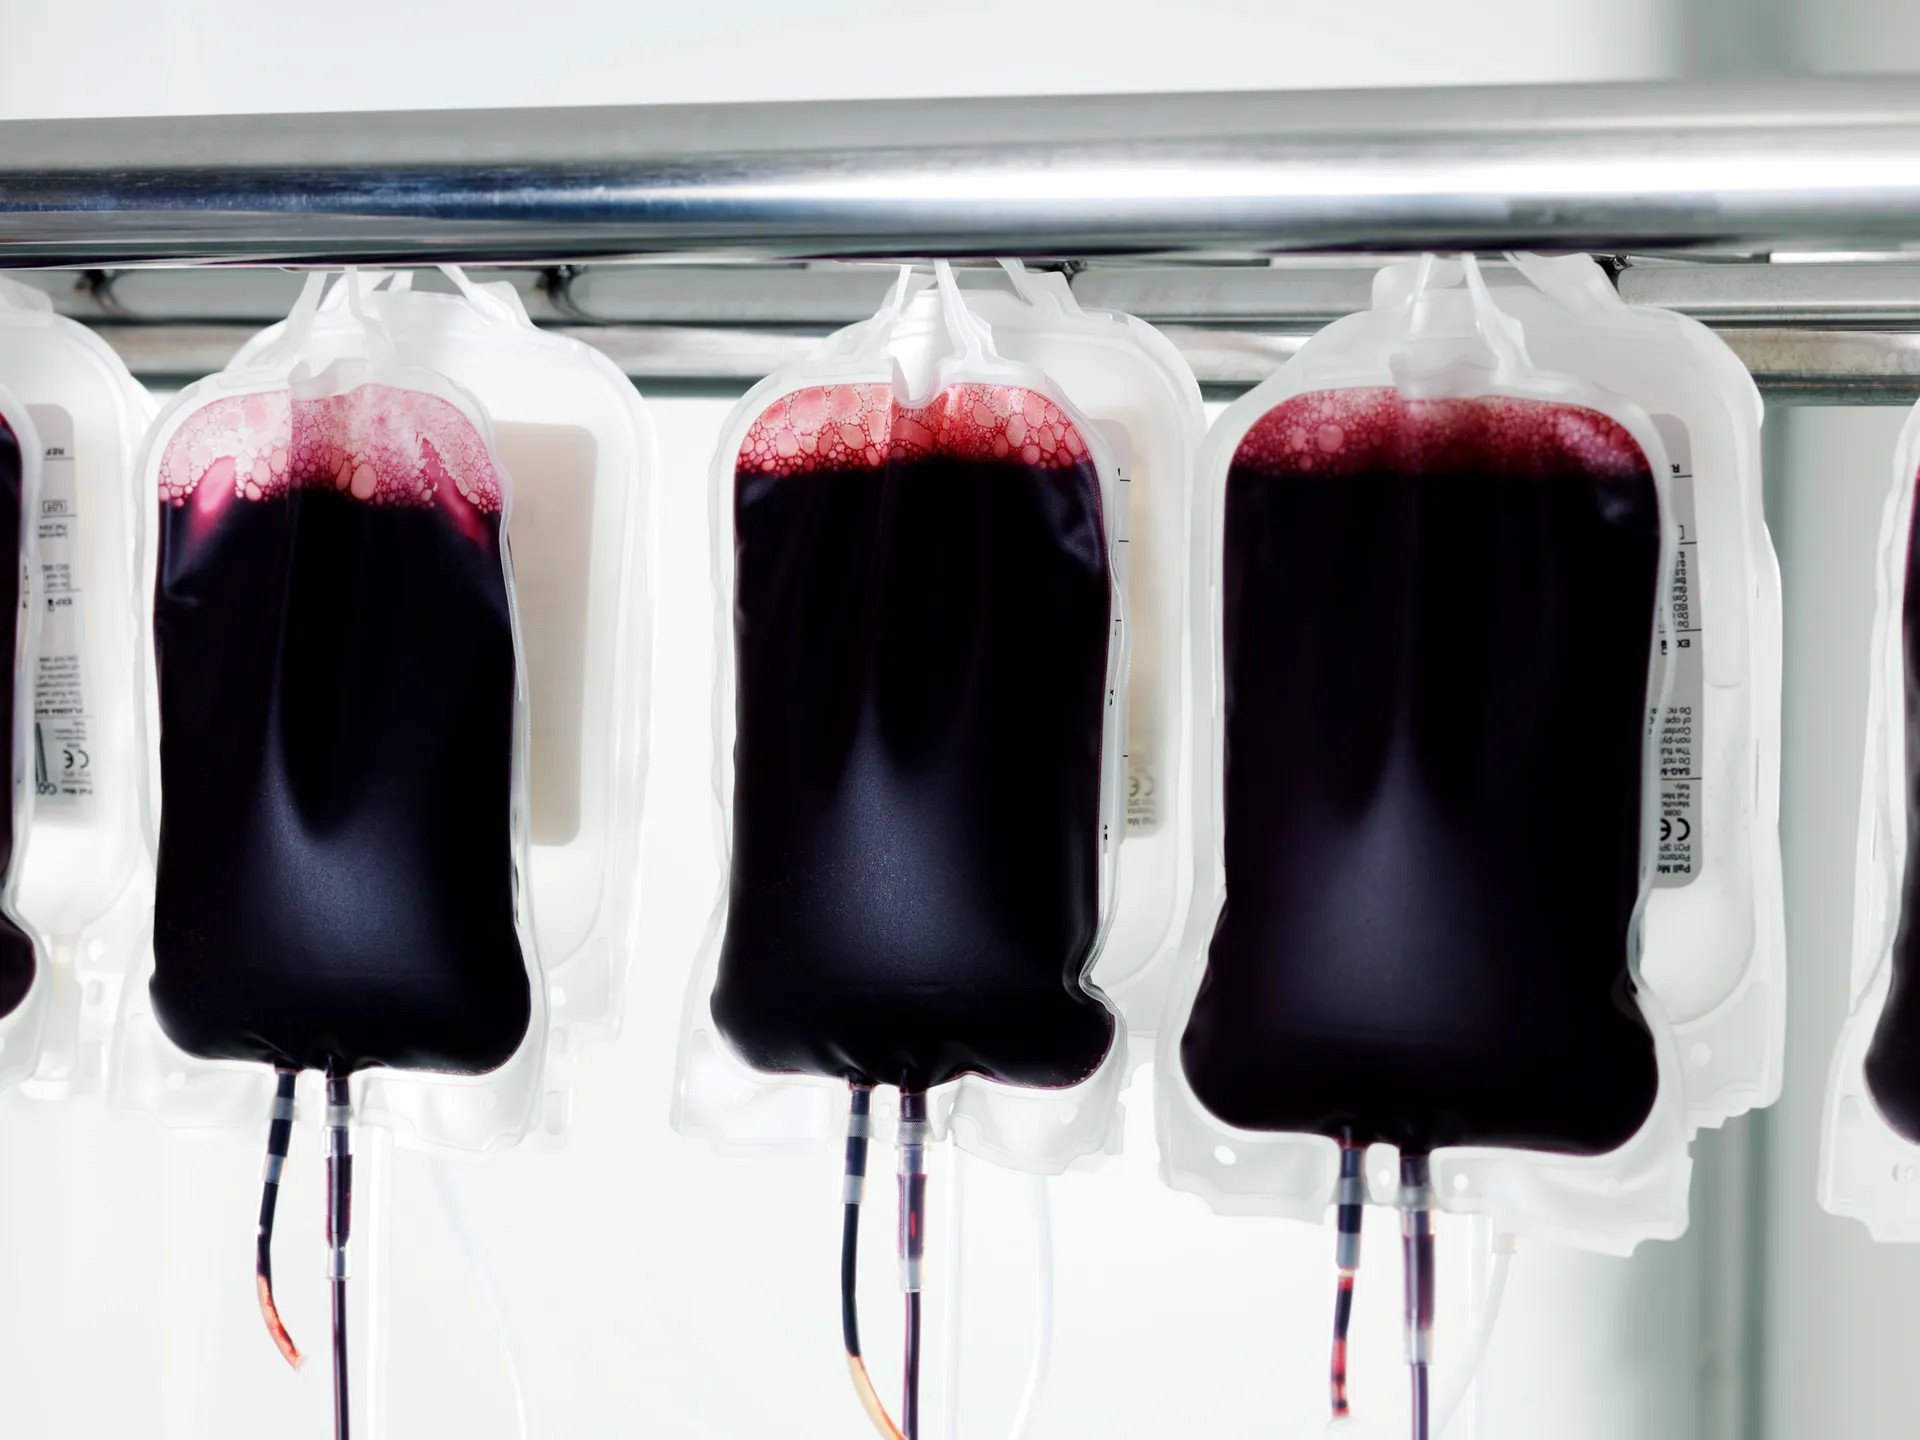 Scientists Have Discovered a New Set of Blood Groups